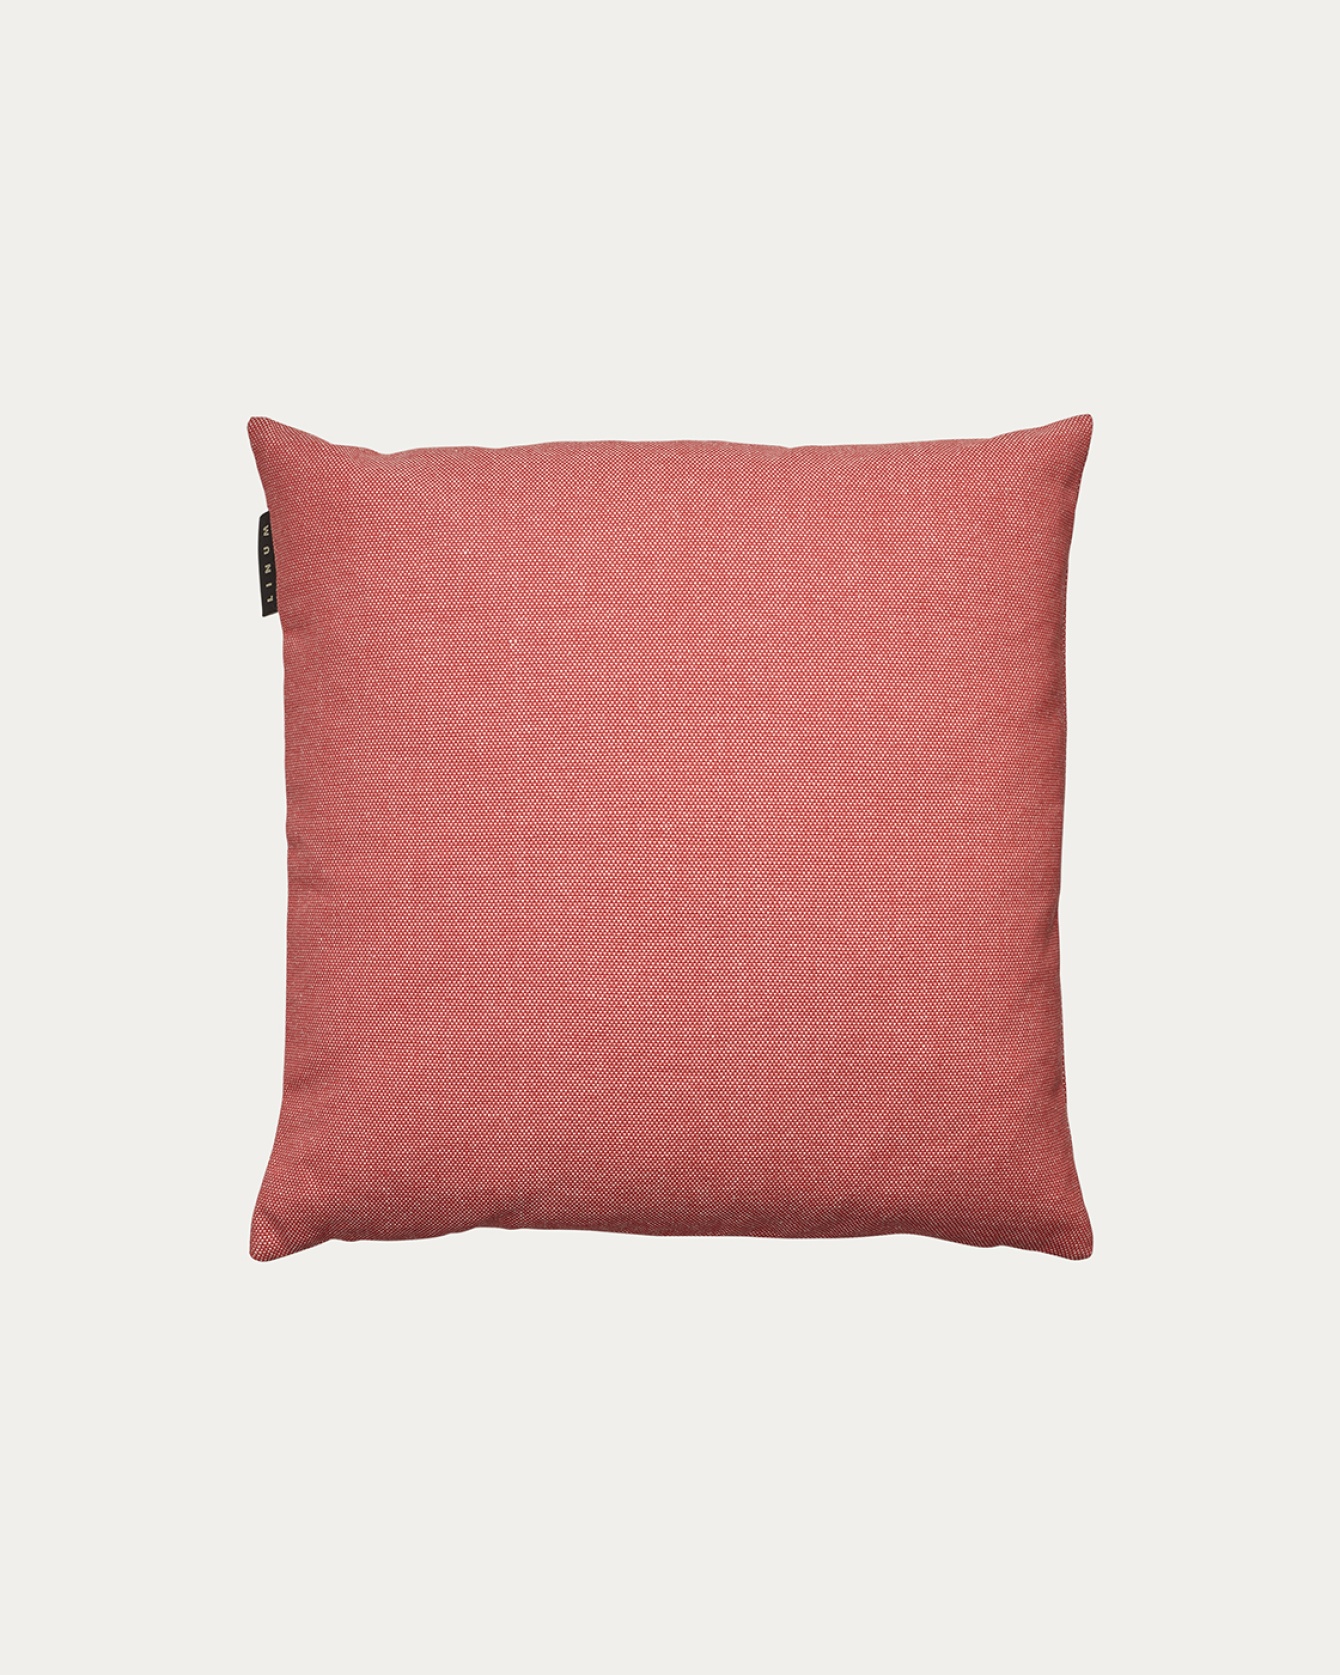 PEPPER Cushion cover 40x40 cm Coral red